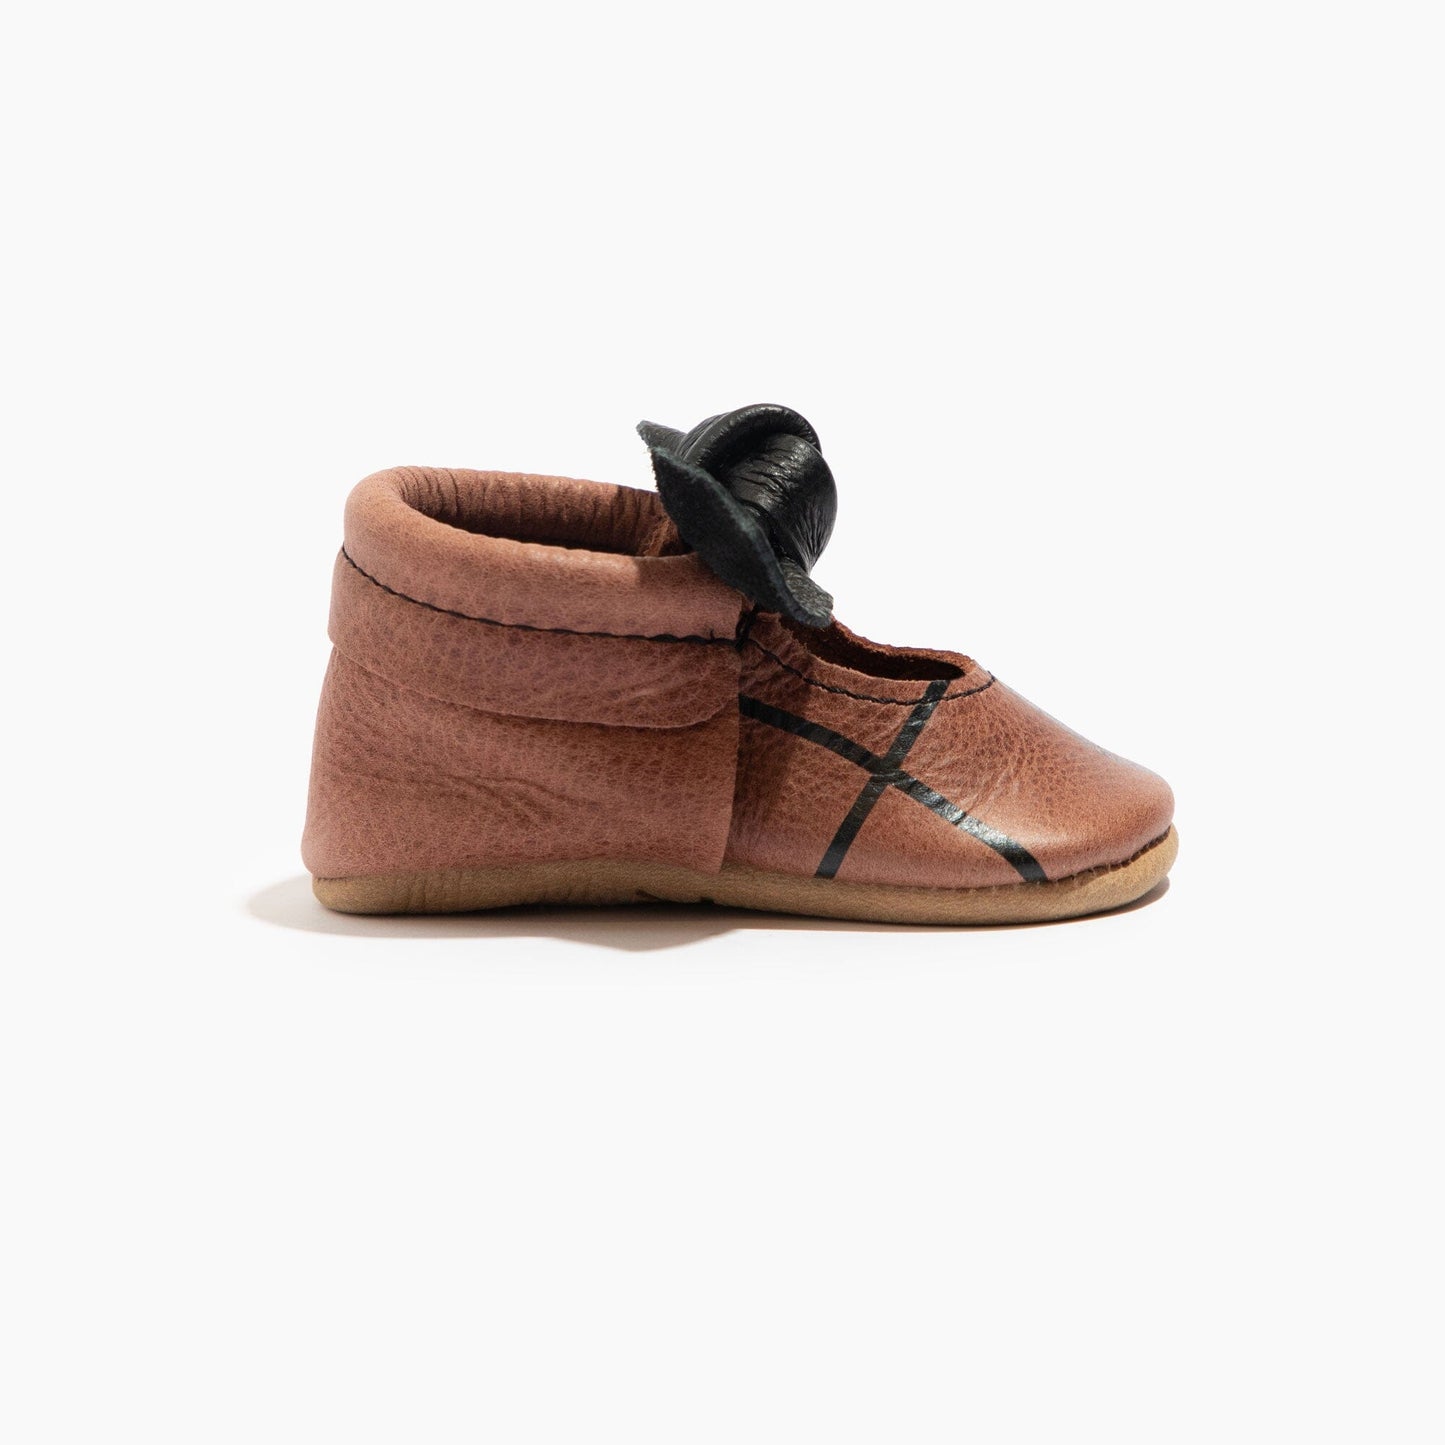 Swish Knotted Bow Mocc Knotted Bow Mocc Soft Sole 